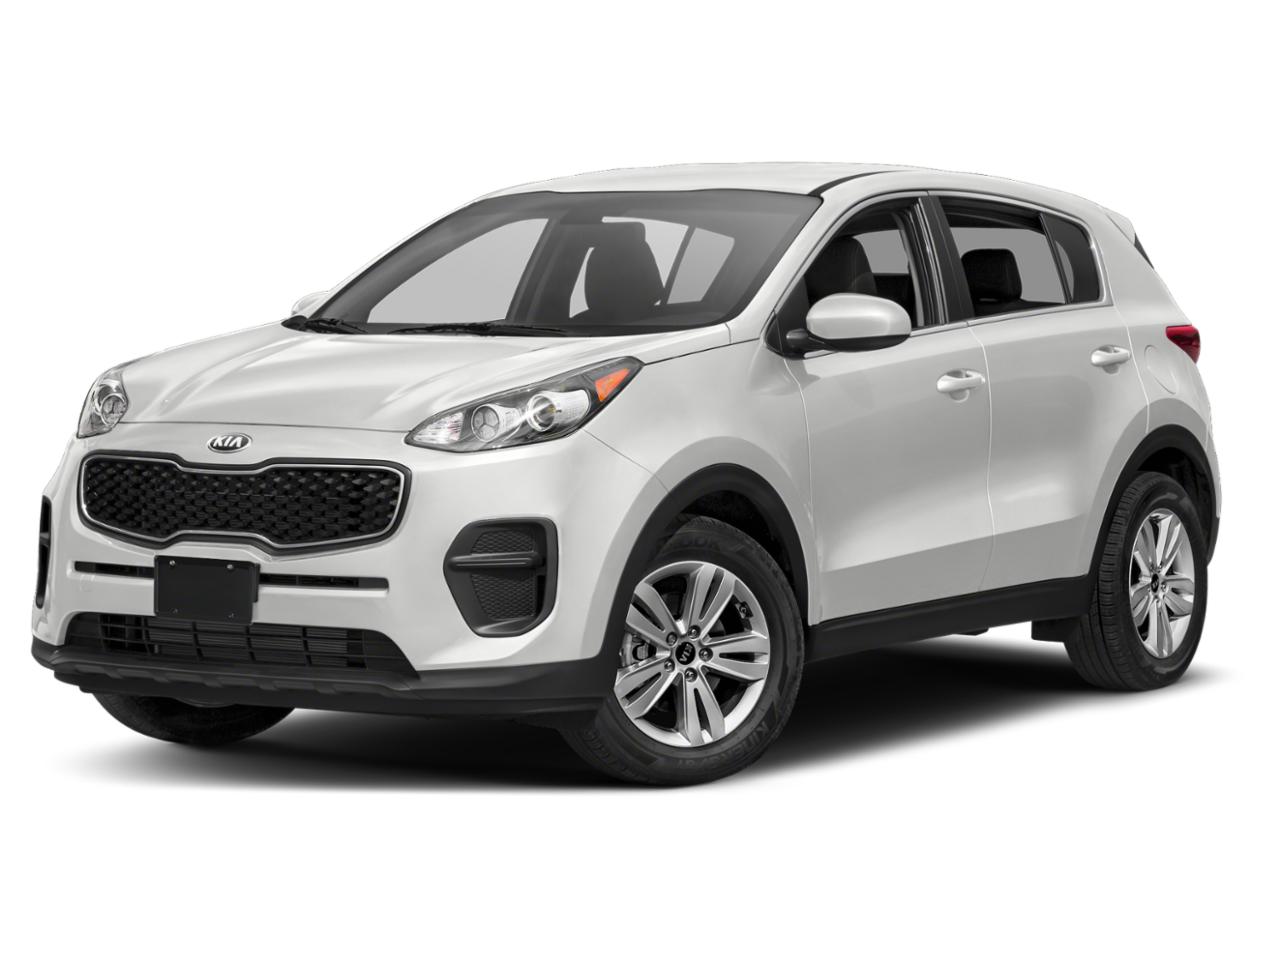 Used White 2019 Kia Sportage Suv for Sale in INDEPENDENCE, MO - DKX3485